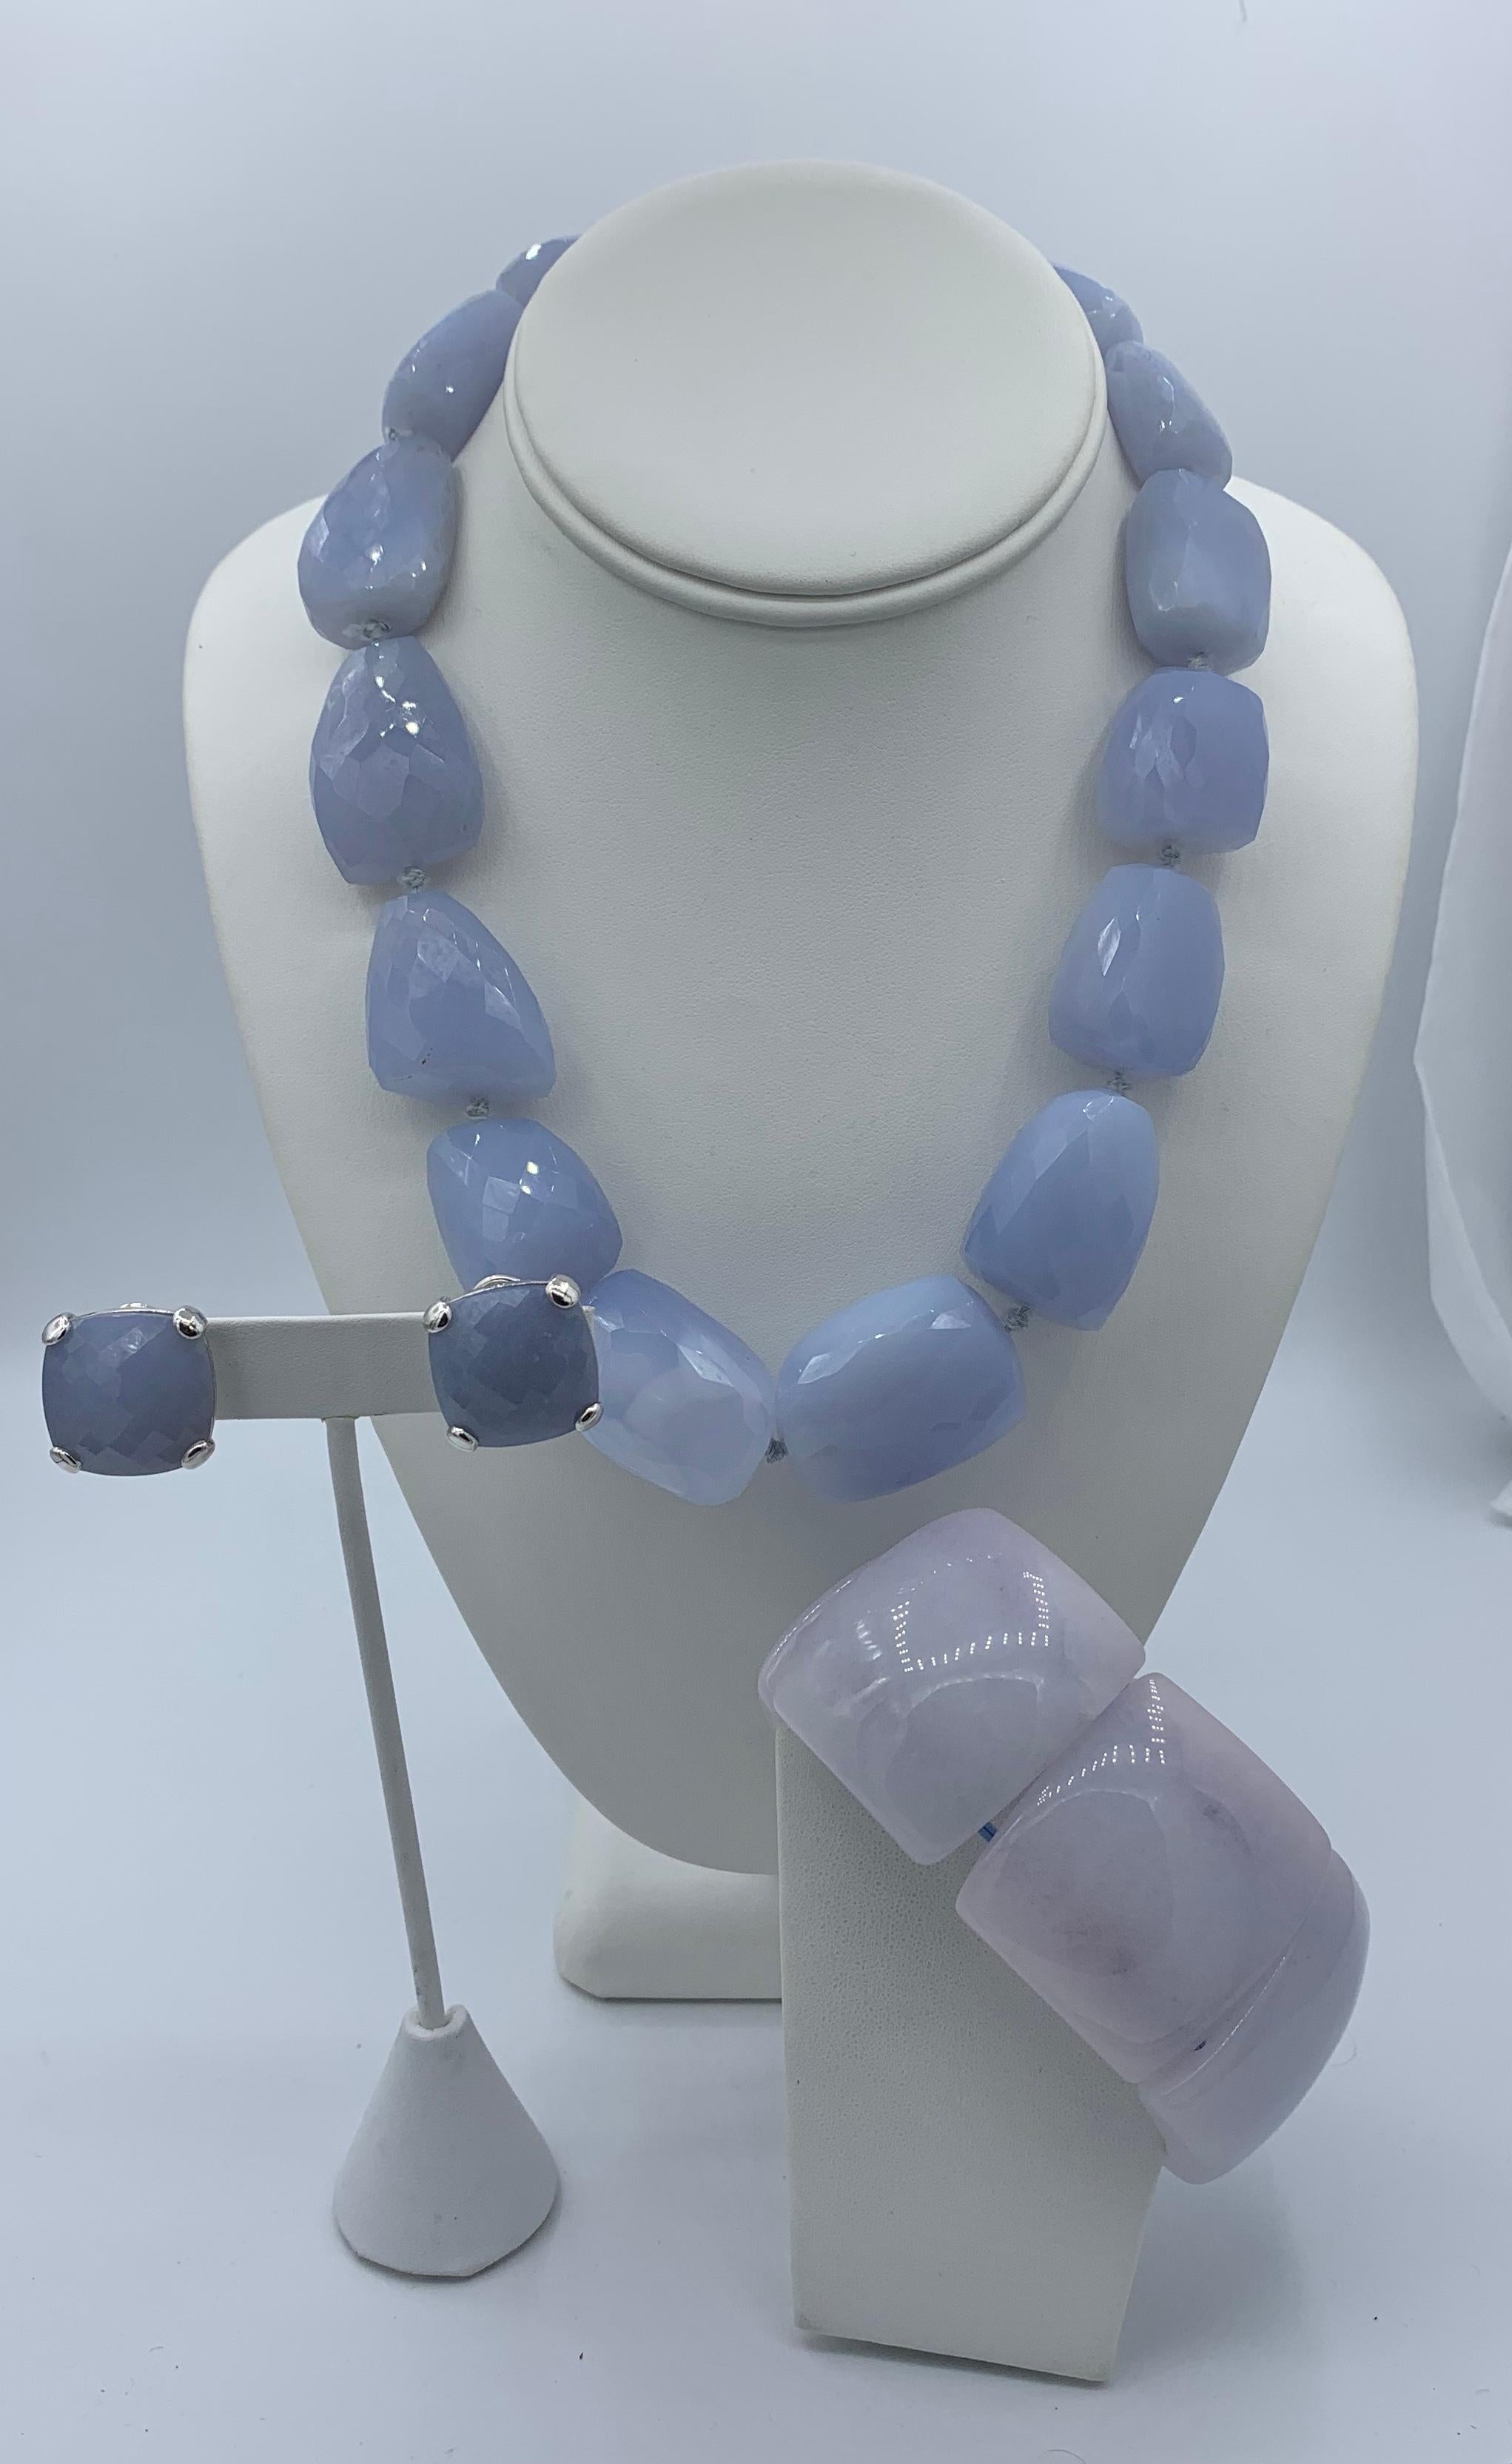 WE HAVE A STUNNING SET OF TAMBETTI WHITE GOLD AND BLUE CHALCEDONY JEWELRY FROM THE ESTATE OF LEGENDARY WRITER BARBARA TAYLOR BRADFORD, OBE (Order of the British Empire).  THE SET INCLUDES A NECKLACE AND EARRINGS WITH A PANEL LINK BRACELET.  
The